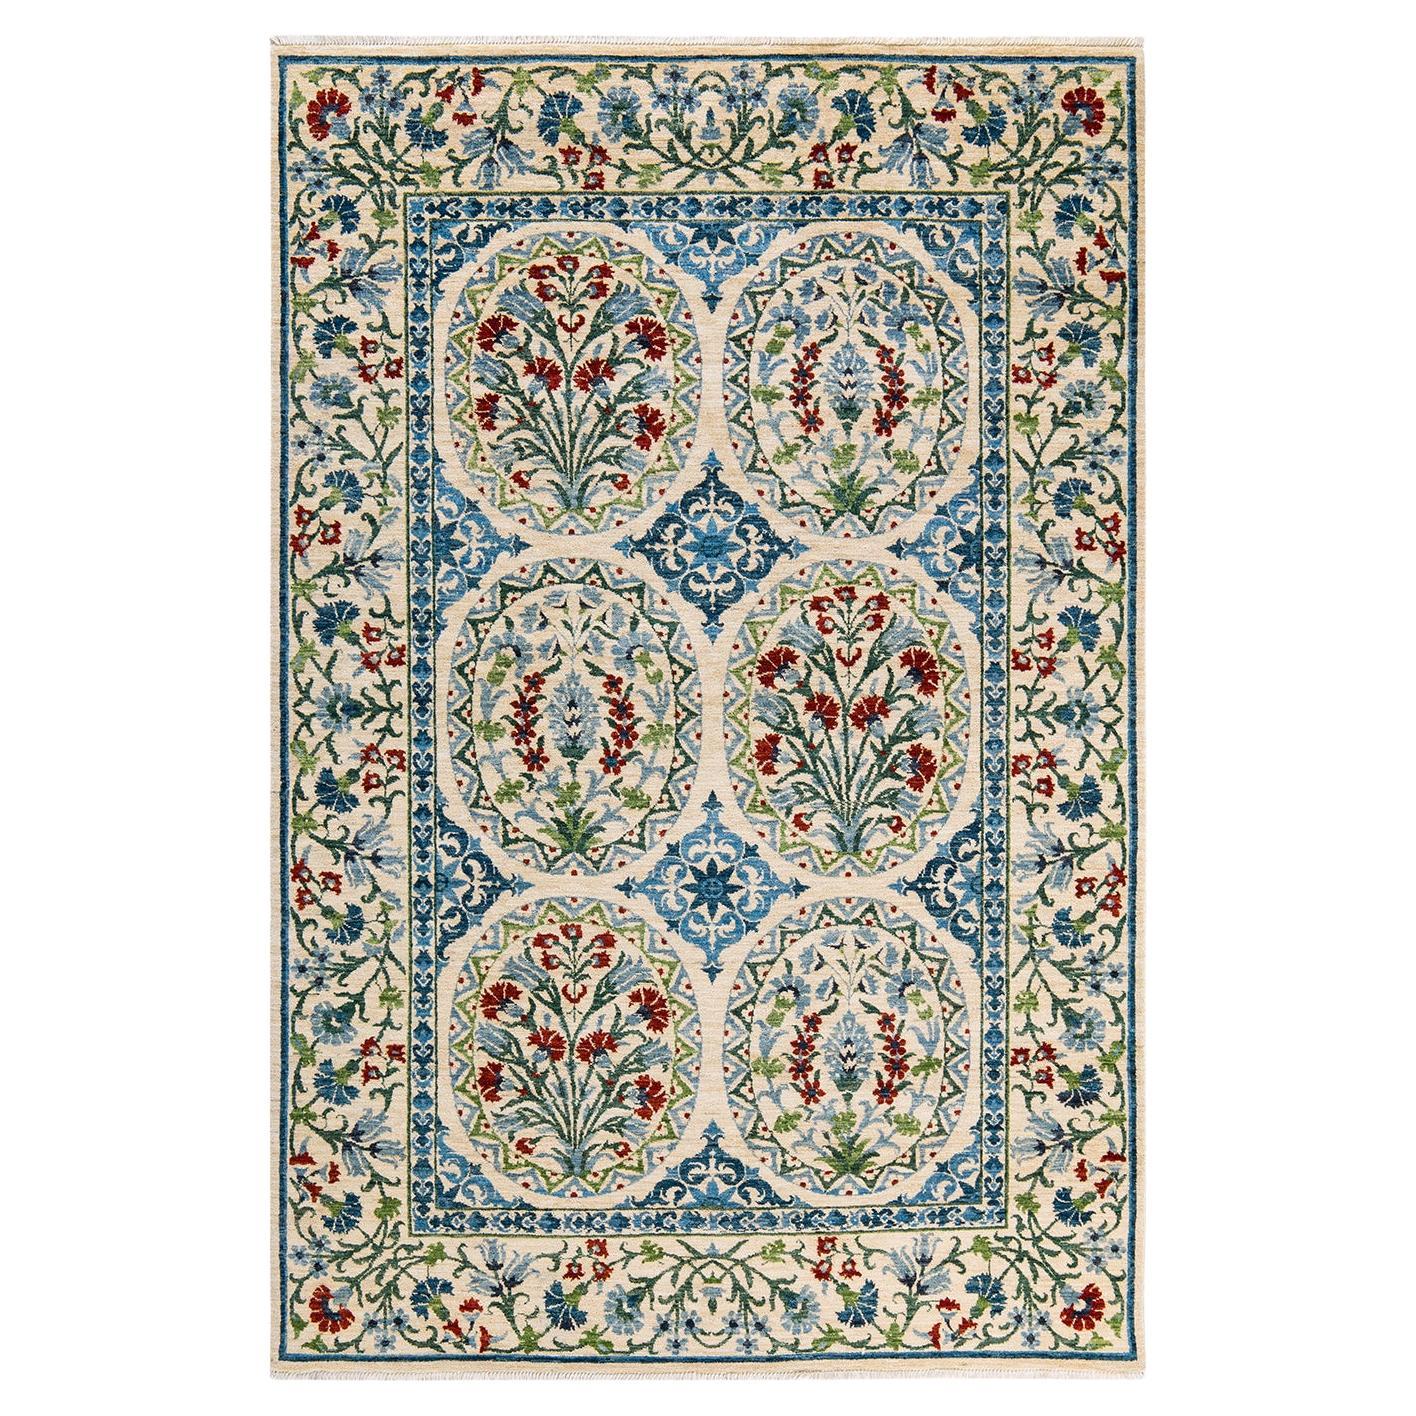 One of a Kind Hand Knotted Contemporary Floral Ivory Area Rug